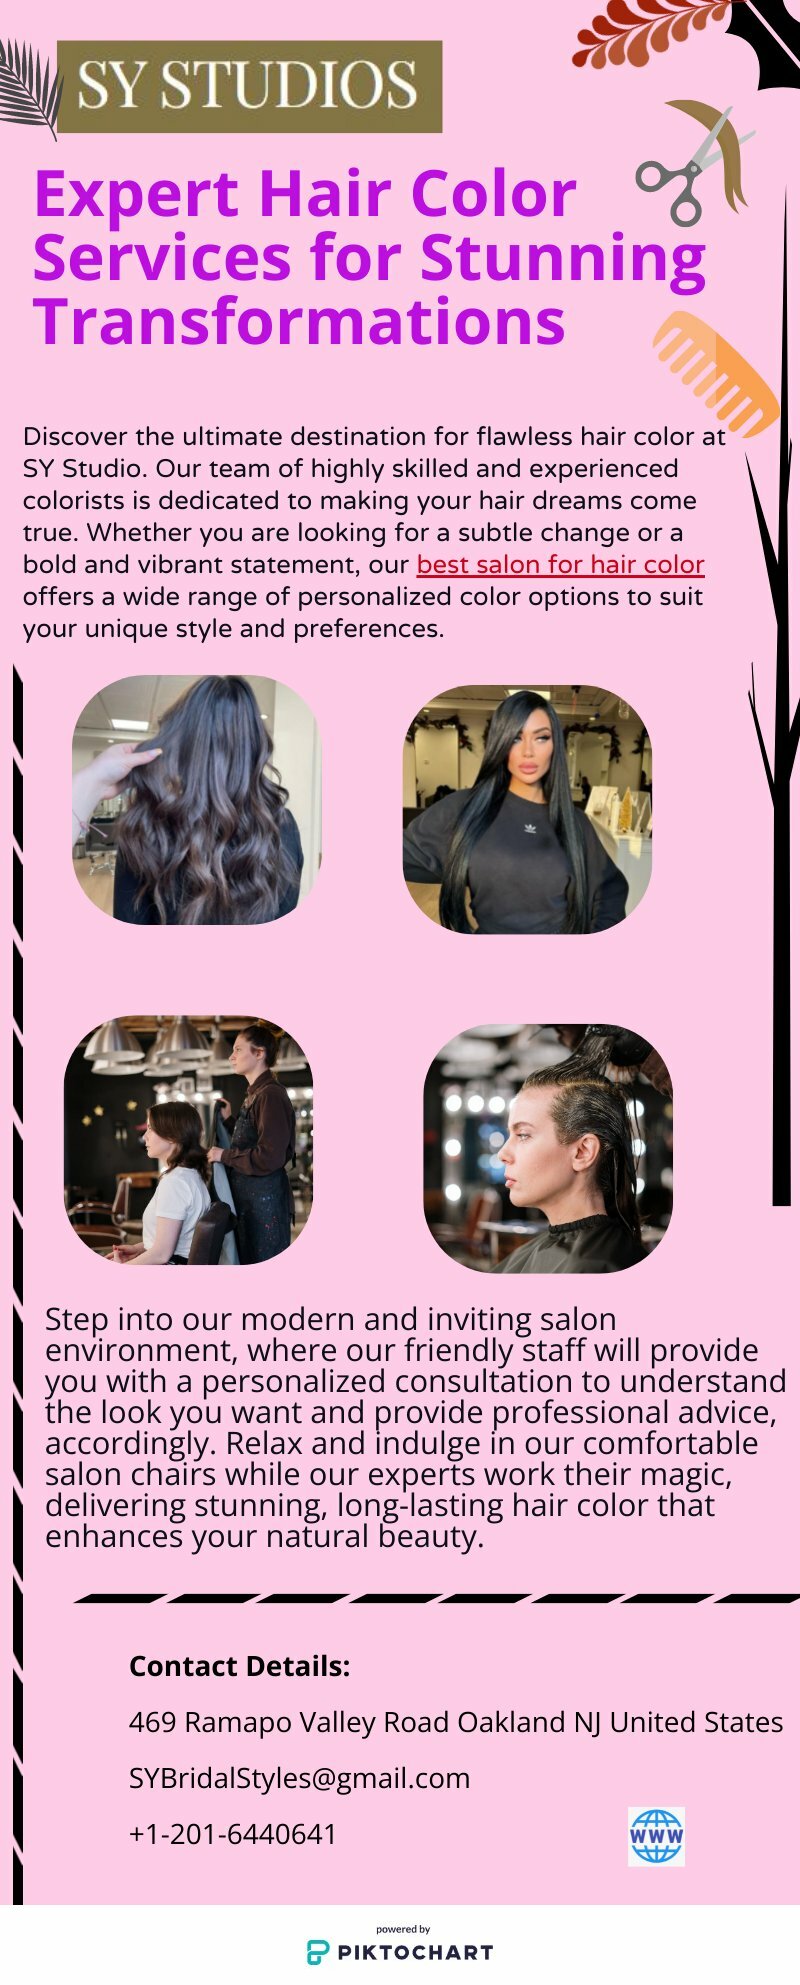 Expert Hair Color Services for Stunning Transformations | Piktochart Visual Editor